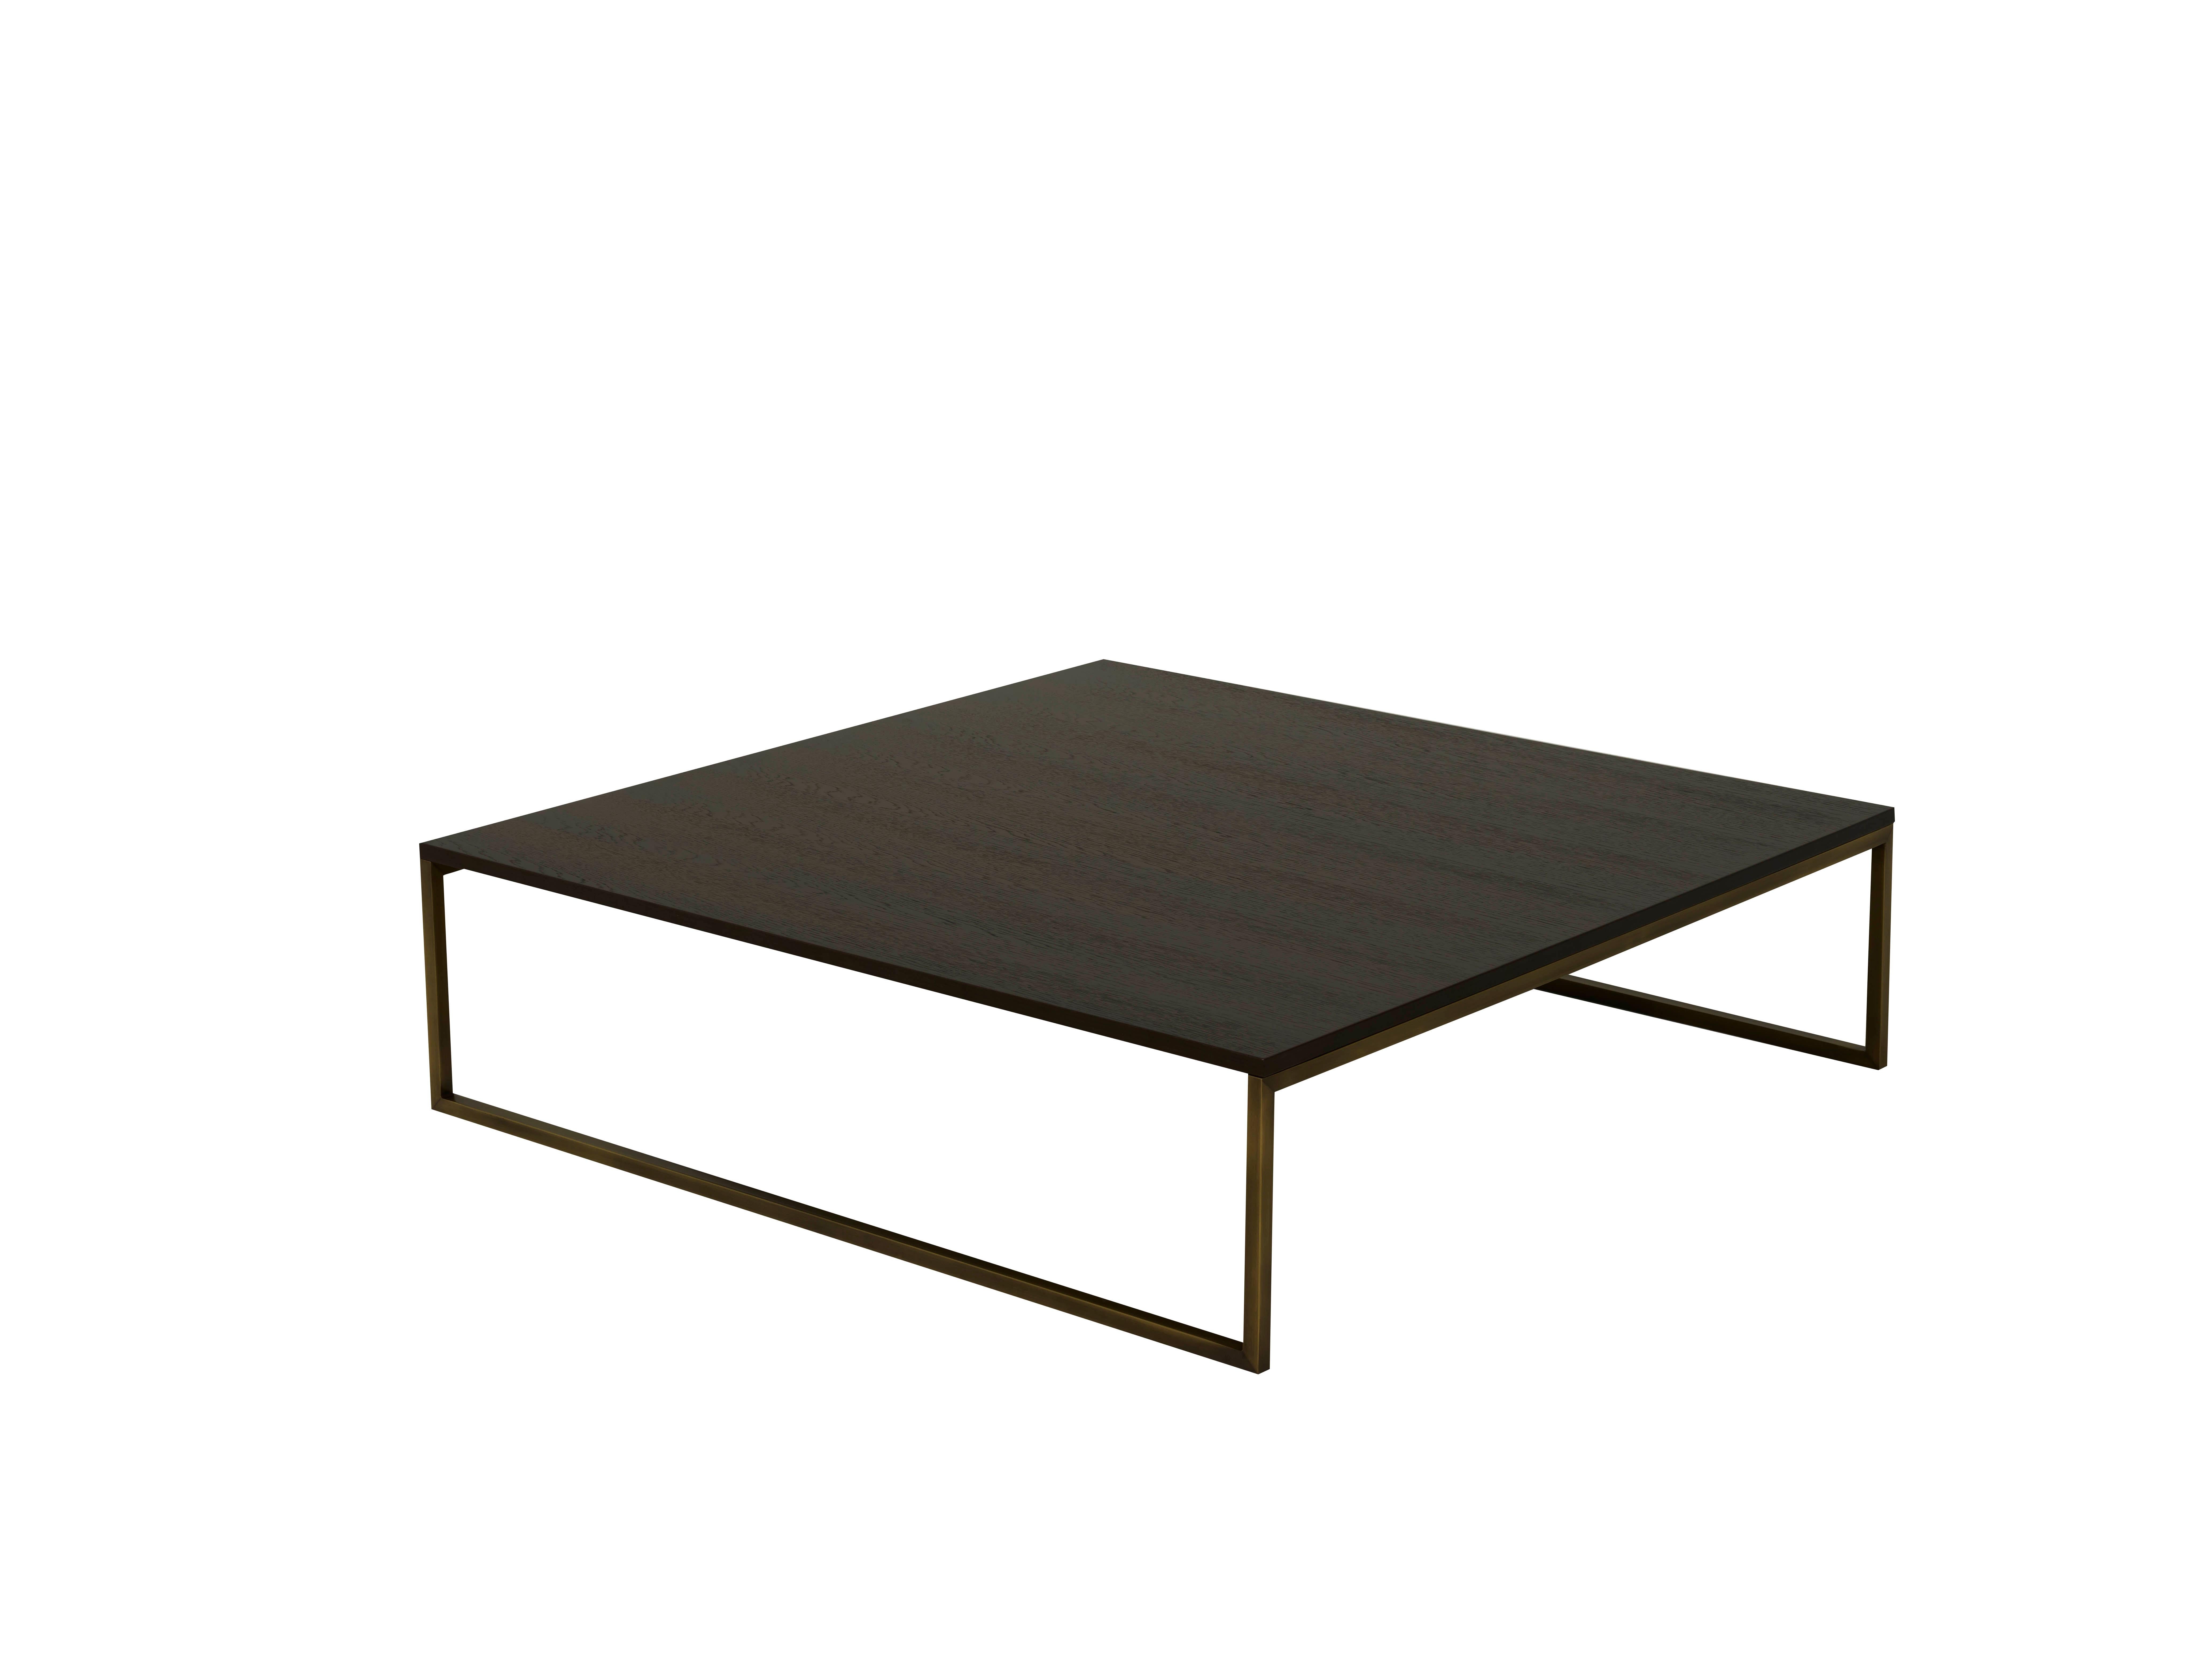 Coffee table by Gürkan Dogan
Dimensions: W 120 x D 120 x H 40 cm
Materials: Smoked Oak, Antique Brass.